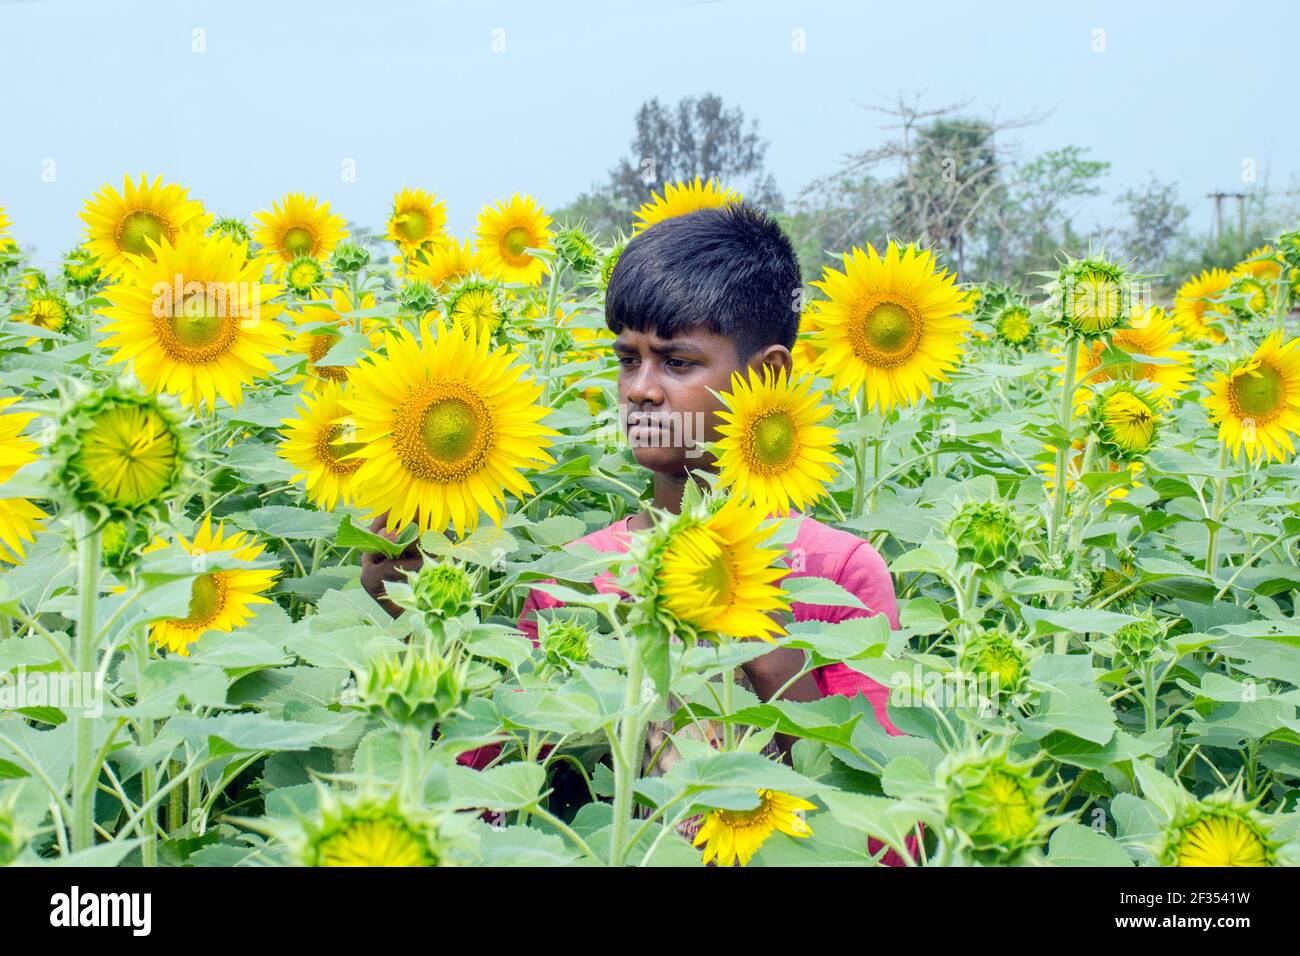 hooghly west bengal india on march 11th 2021:This is a picture of a sunflower field in rural Hooghly.Boys playing in the sunflower field. Stock Photo